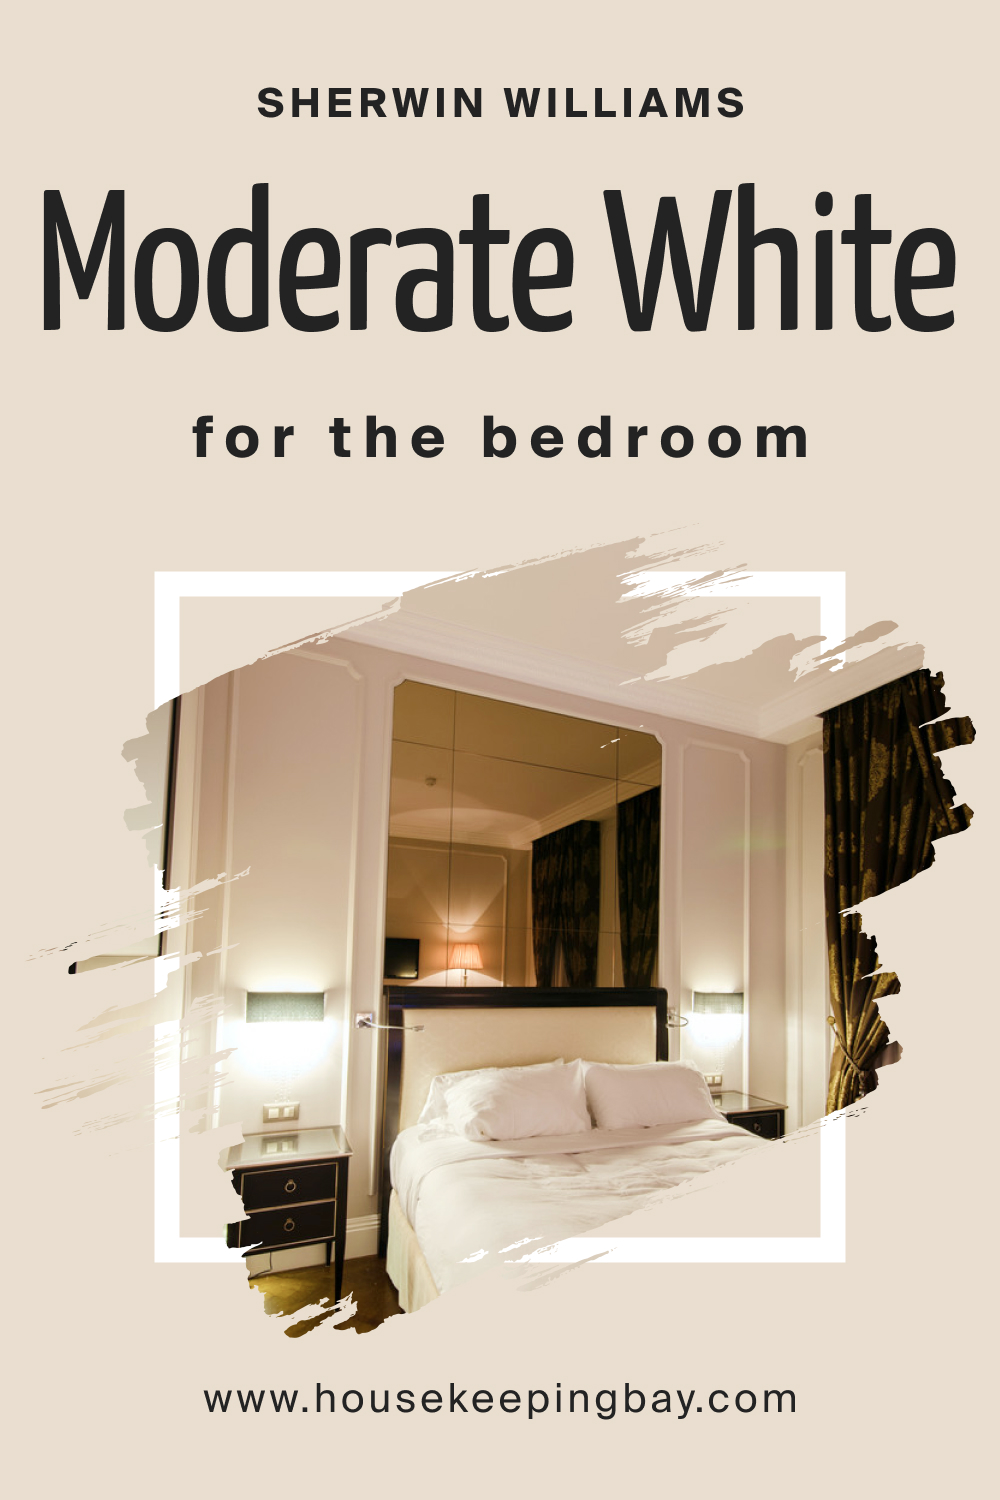 Sherwin Williams. SW Moderate White For the bedroom